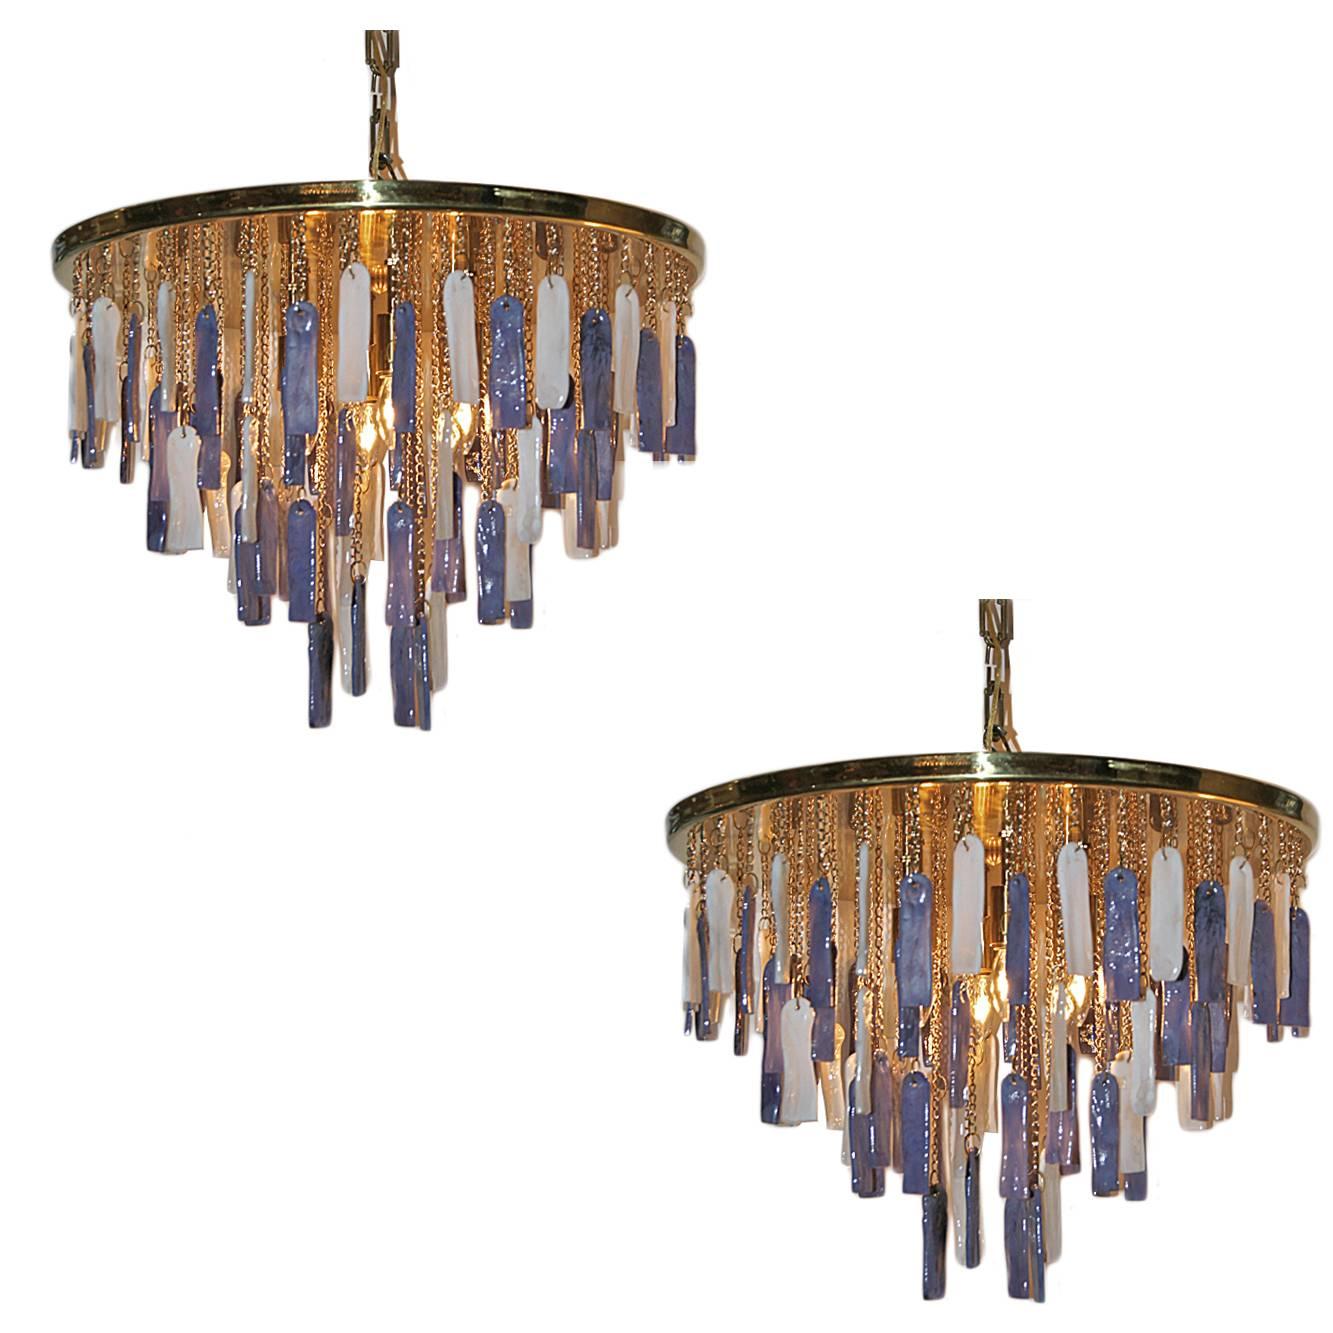 A pair of circa 1960's Italian ceiling fixtures with white and amethyst art glass pendants on brass chain. Sold individually.

Measurements:
Diameter: 23